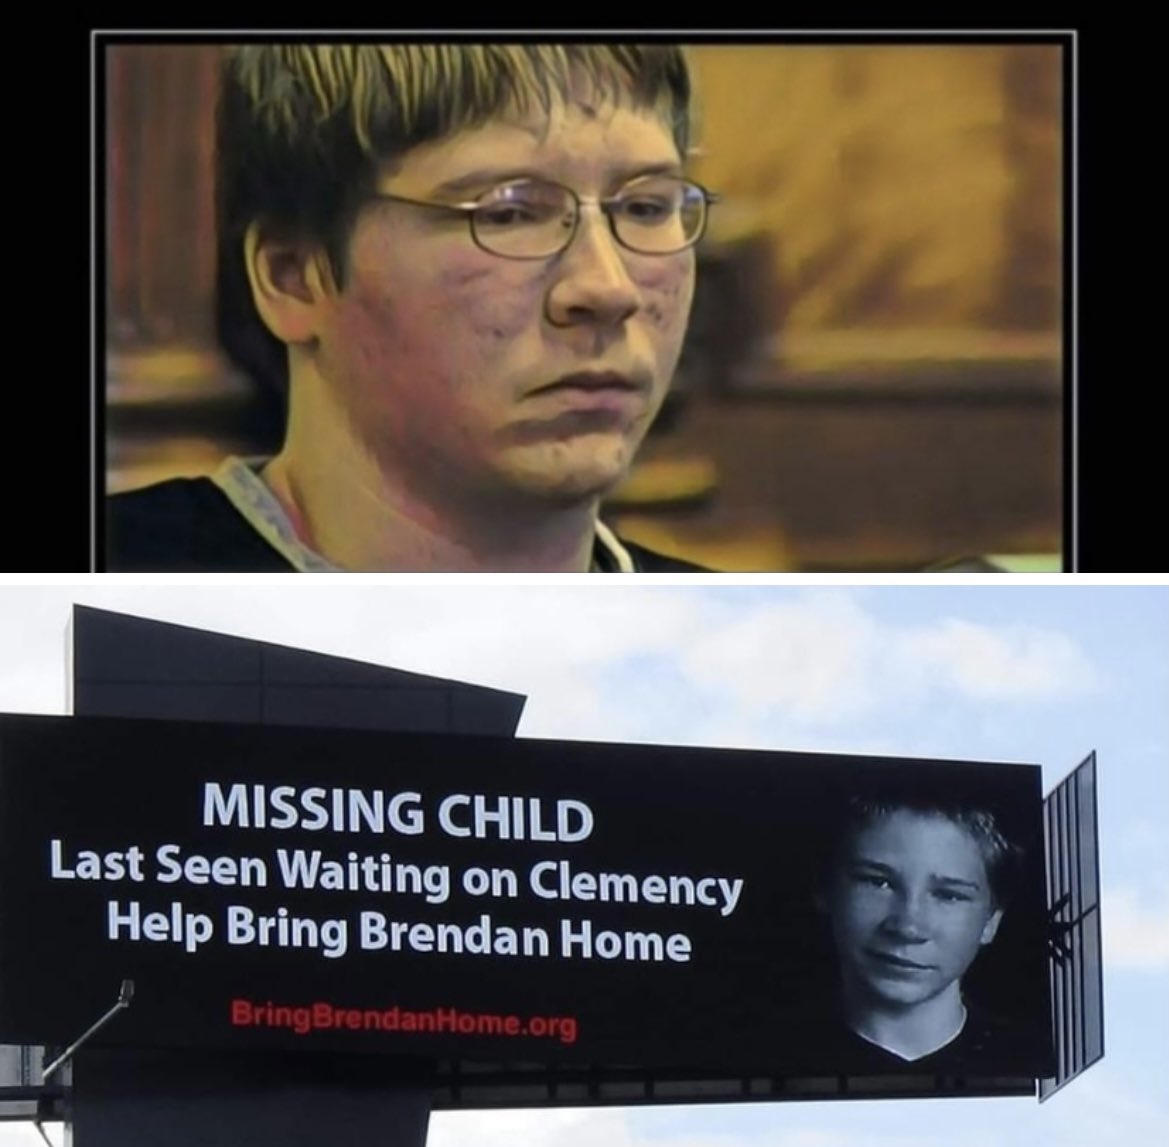 @GovEvers Missing child waiting patiently for you to do the right thing #clemency #FreeBrendanDassey #JusticeForDassey #Innocentbehindbars